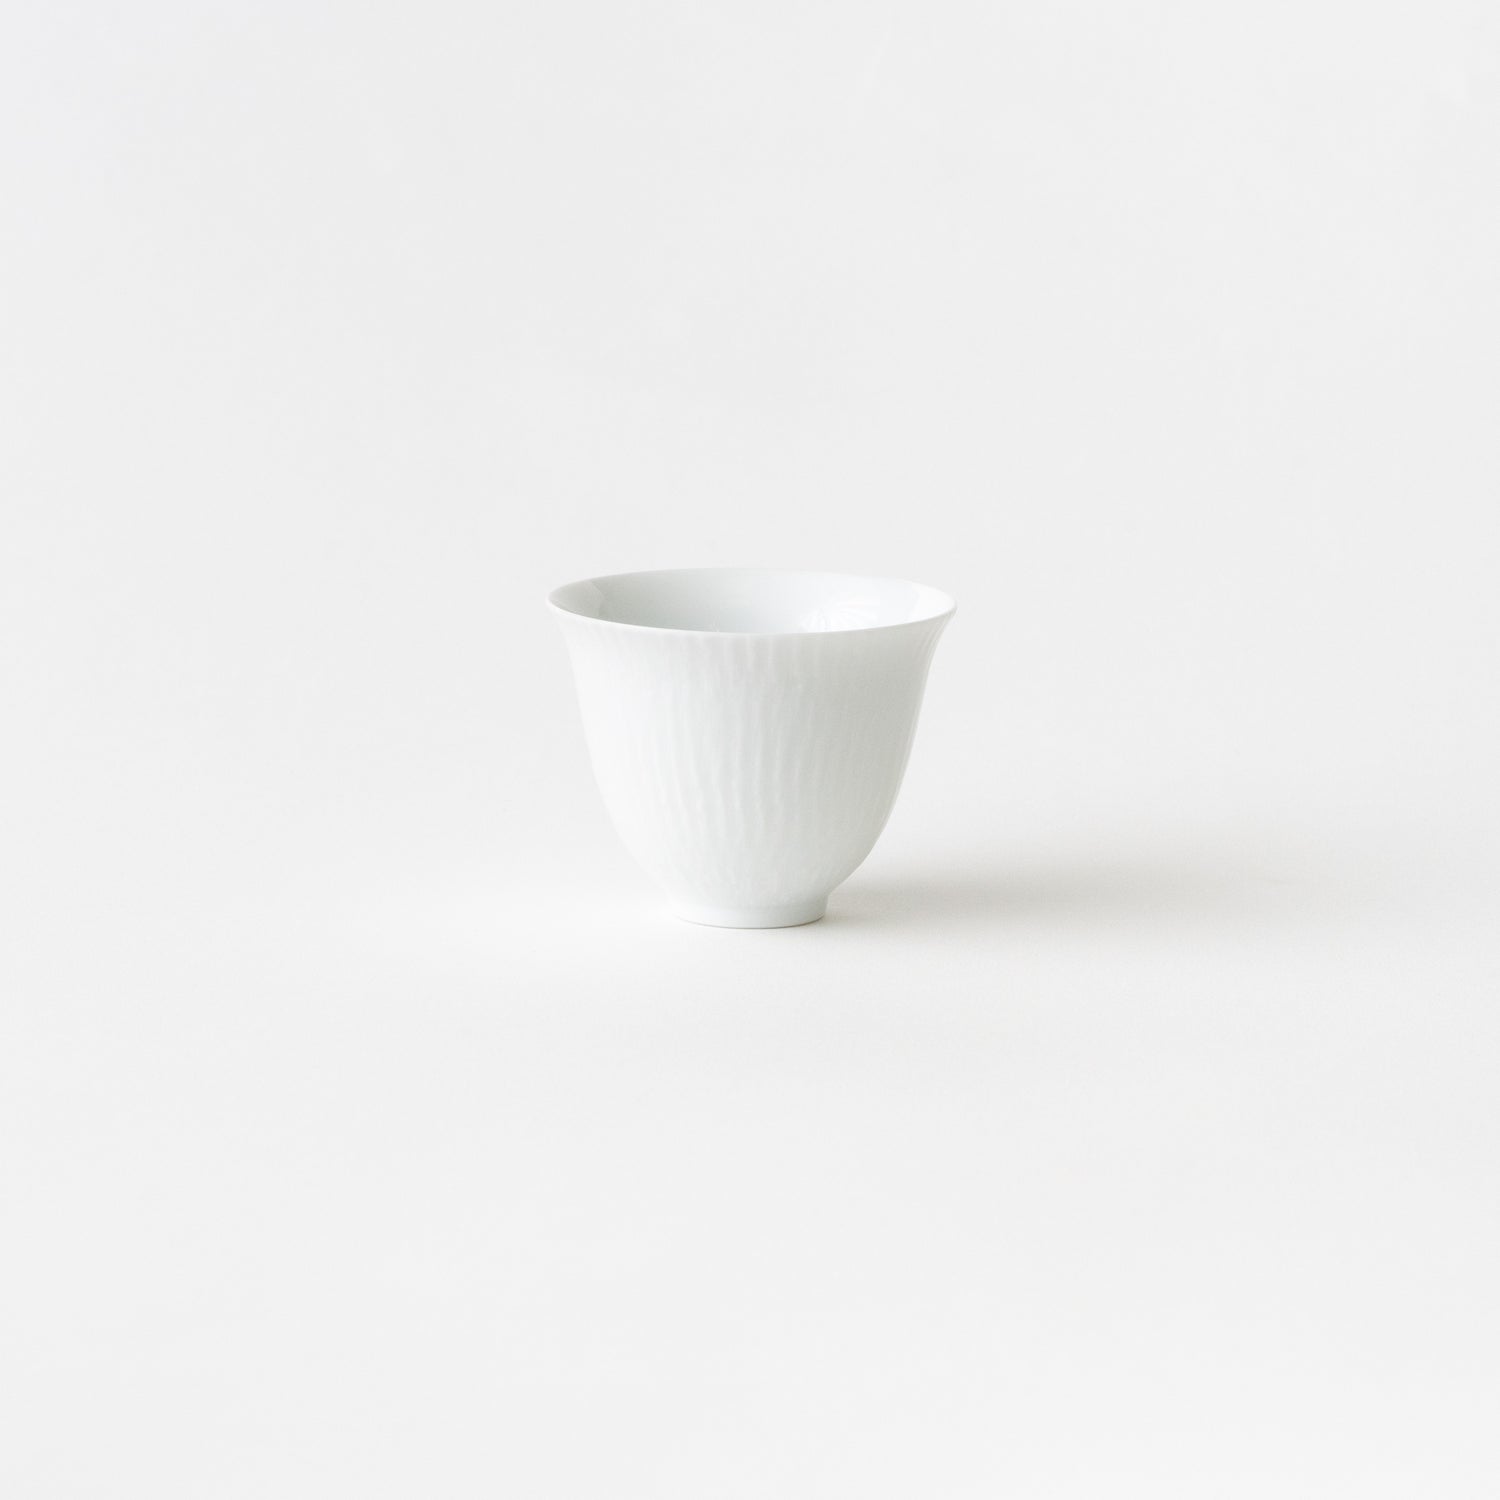 Warped Deep Tea Cup with Saucer / Carved White Lime